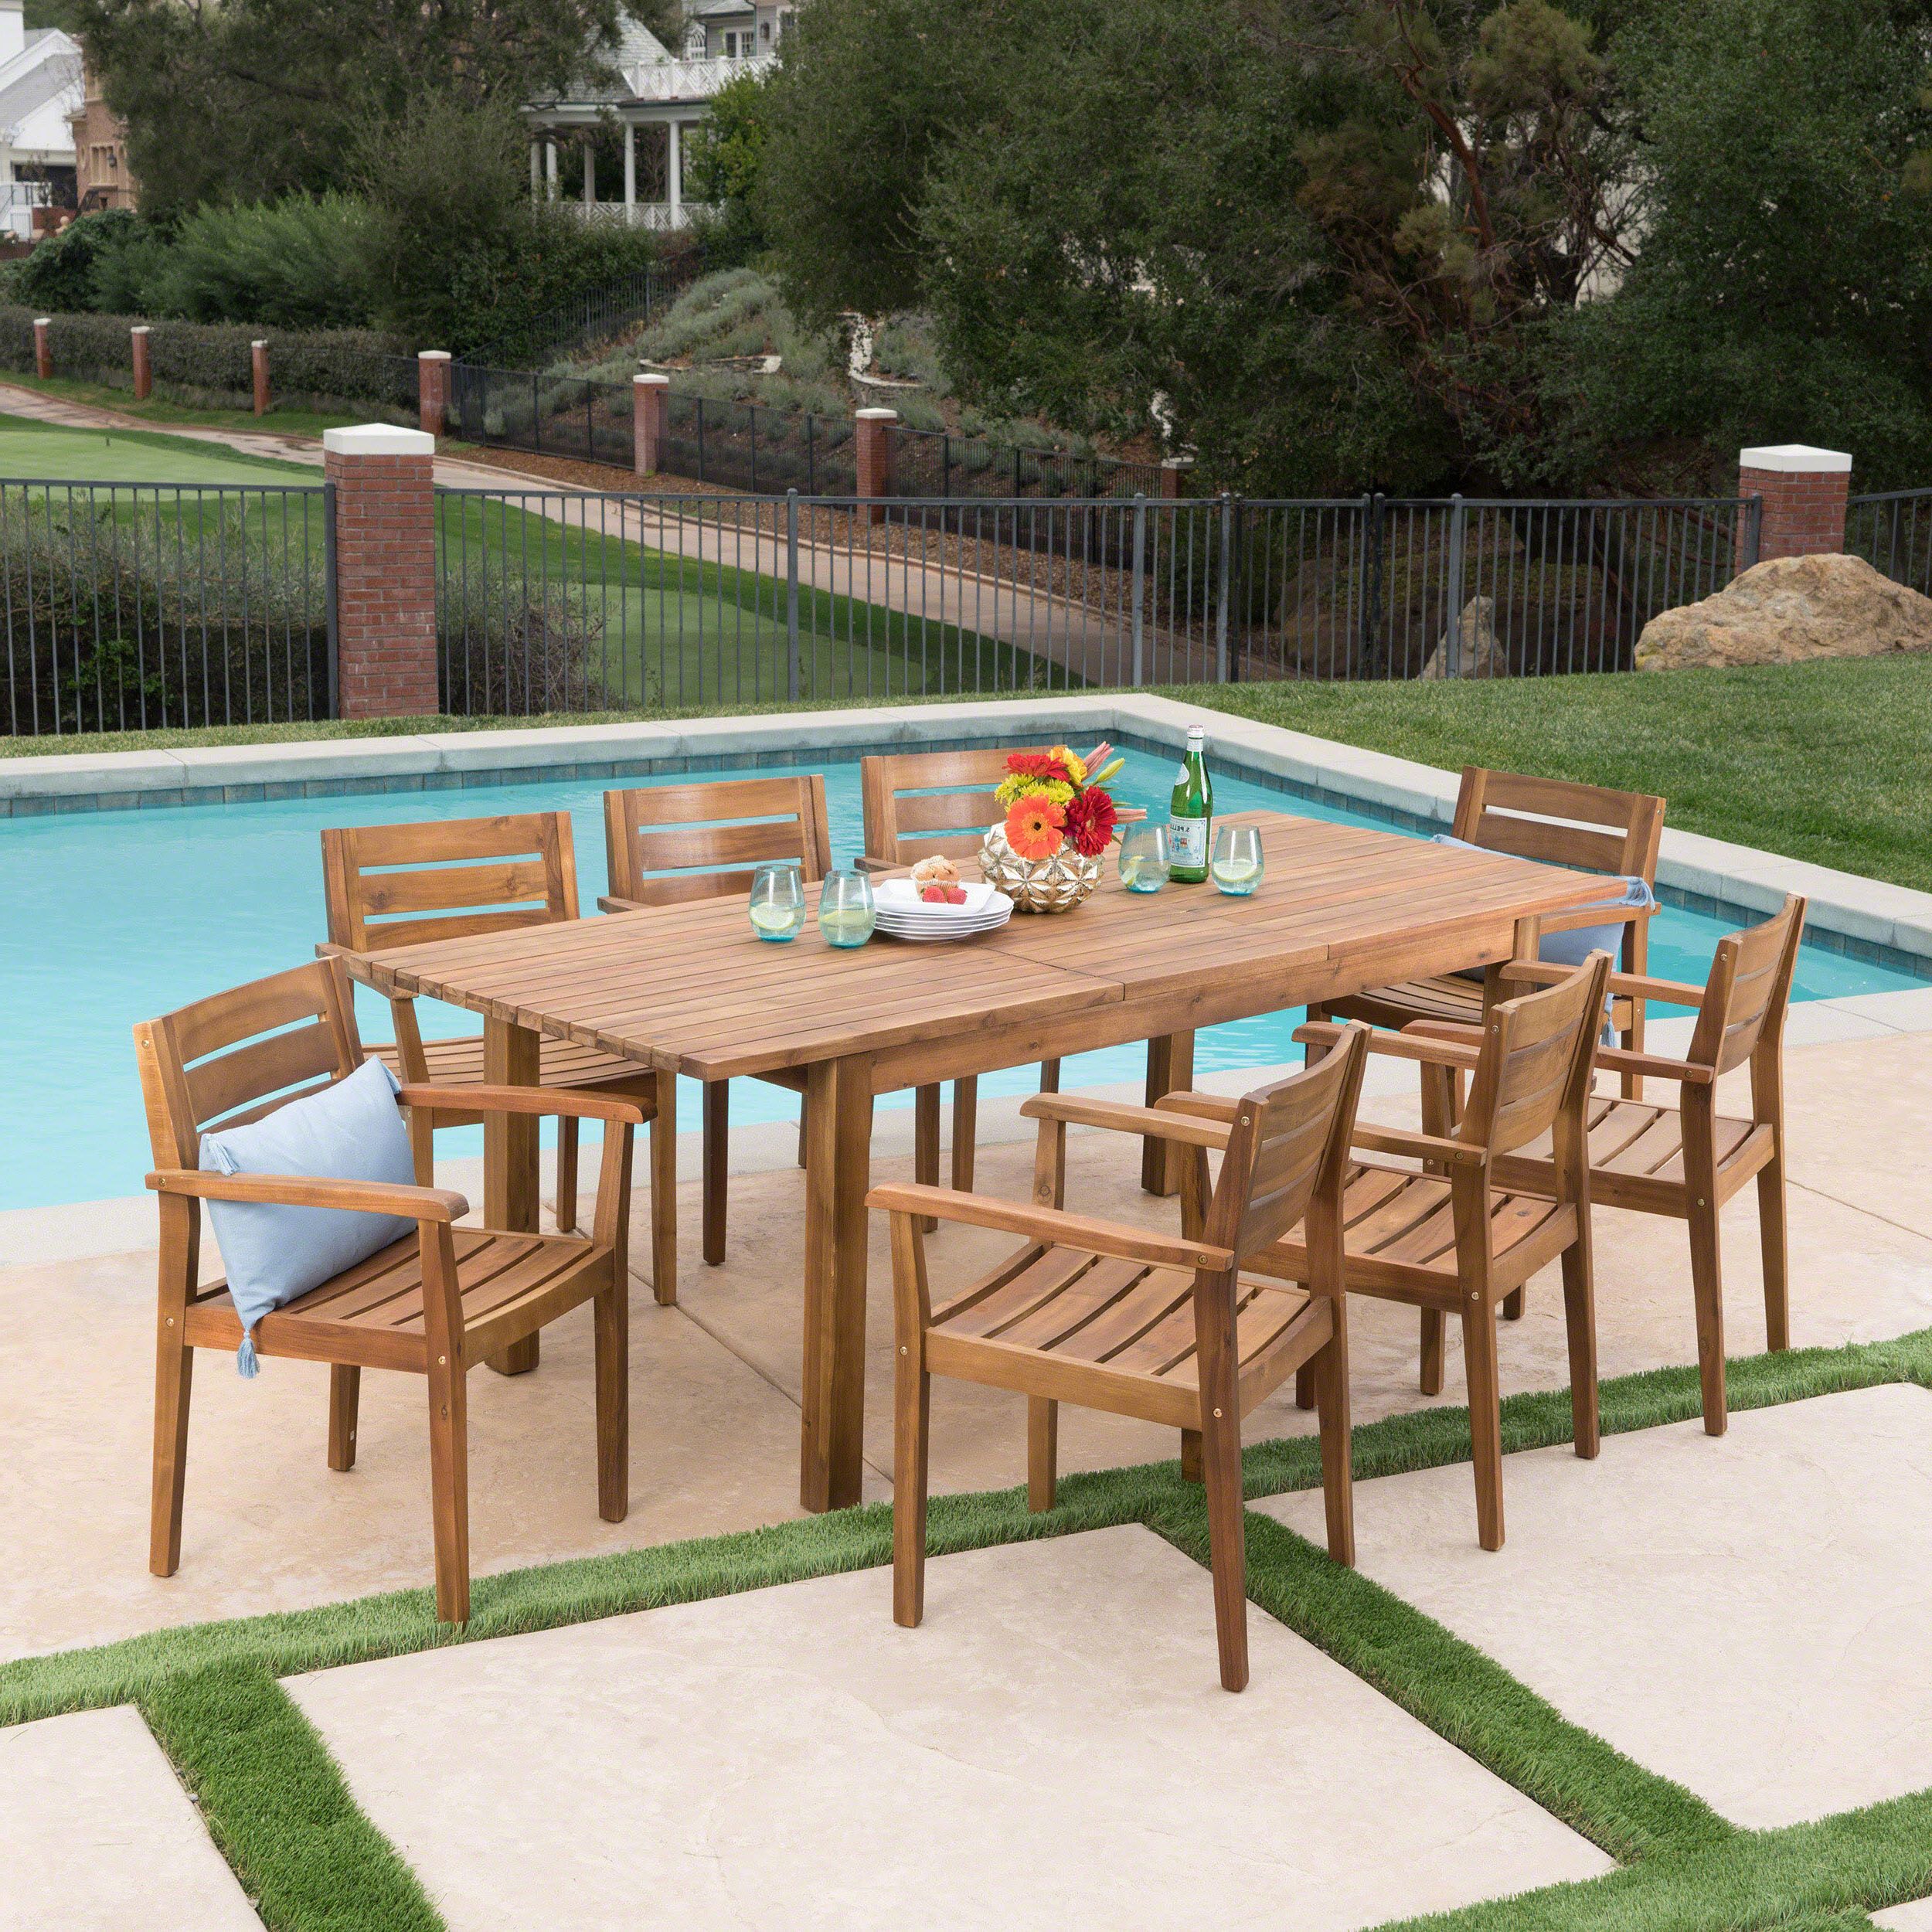 Most Recently Released William Outdoor 9 Piece Acacia Wood Dining Set With Expandable Dining Throughout White Wood Soutdoor Seating Sets (View 4 of 15)